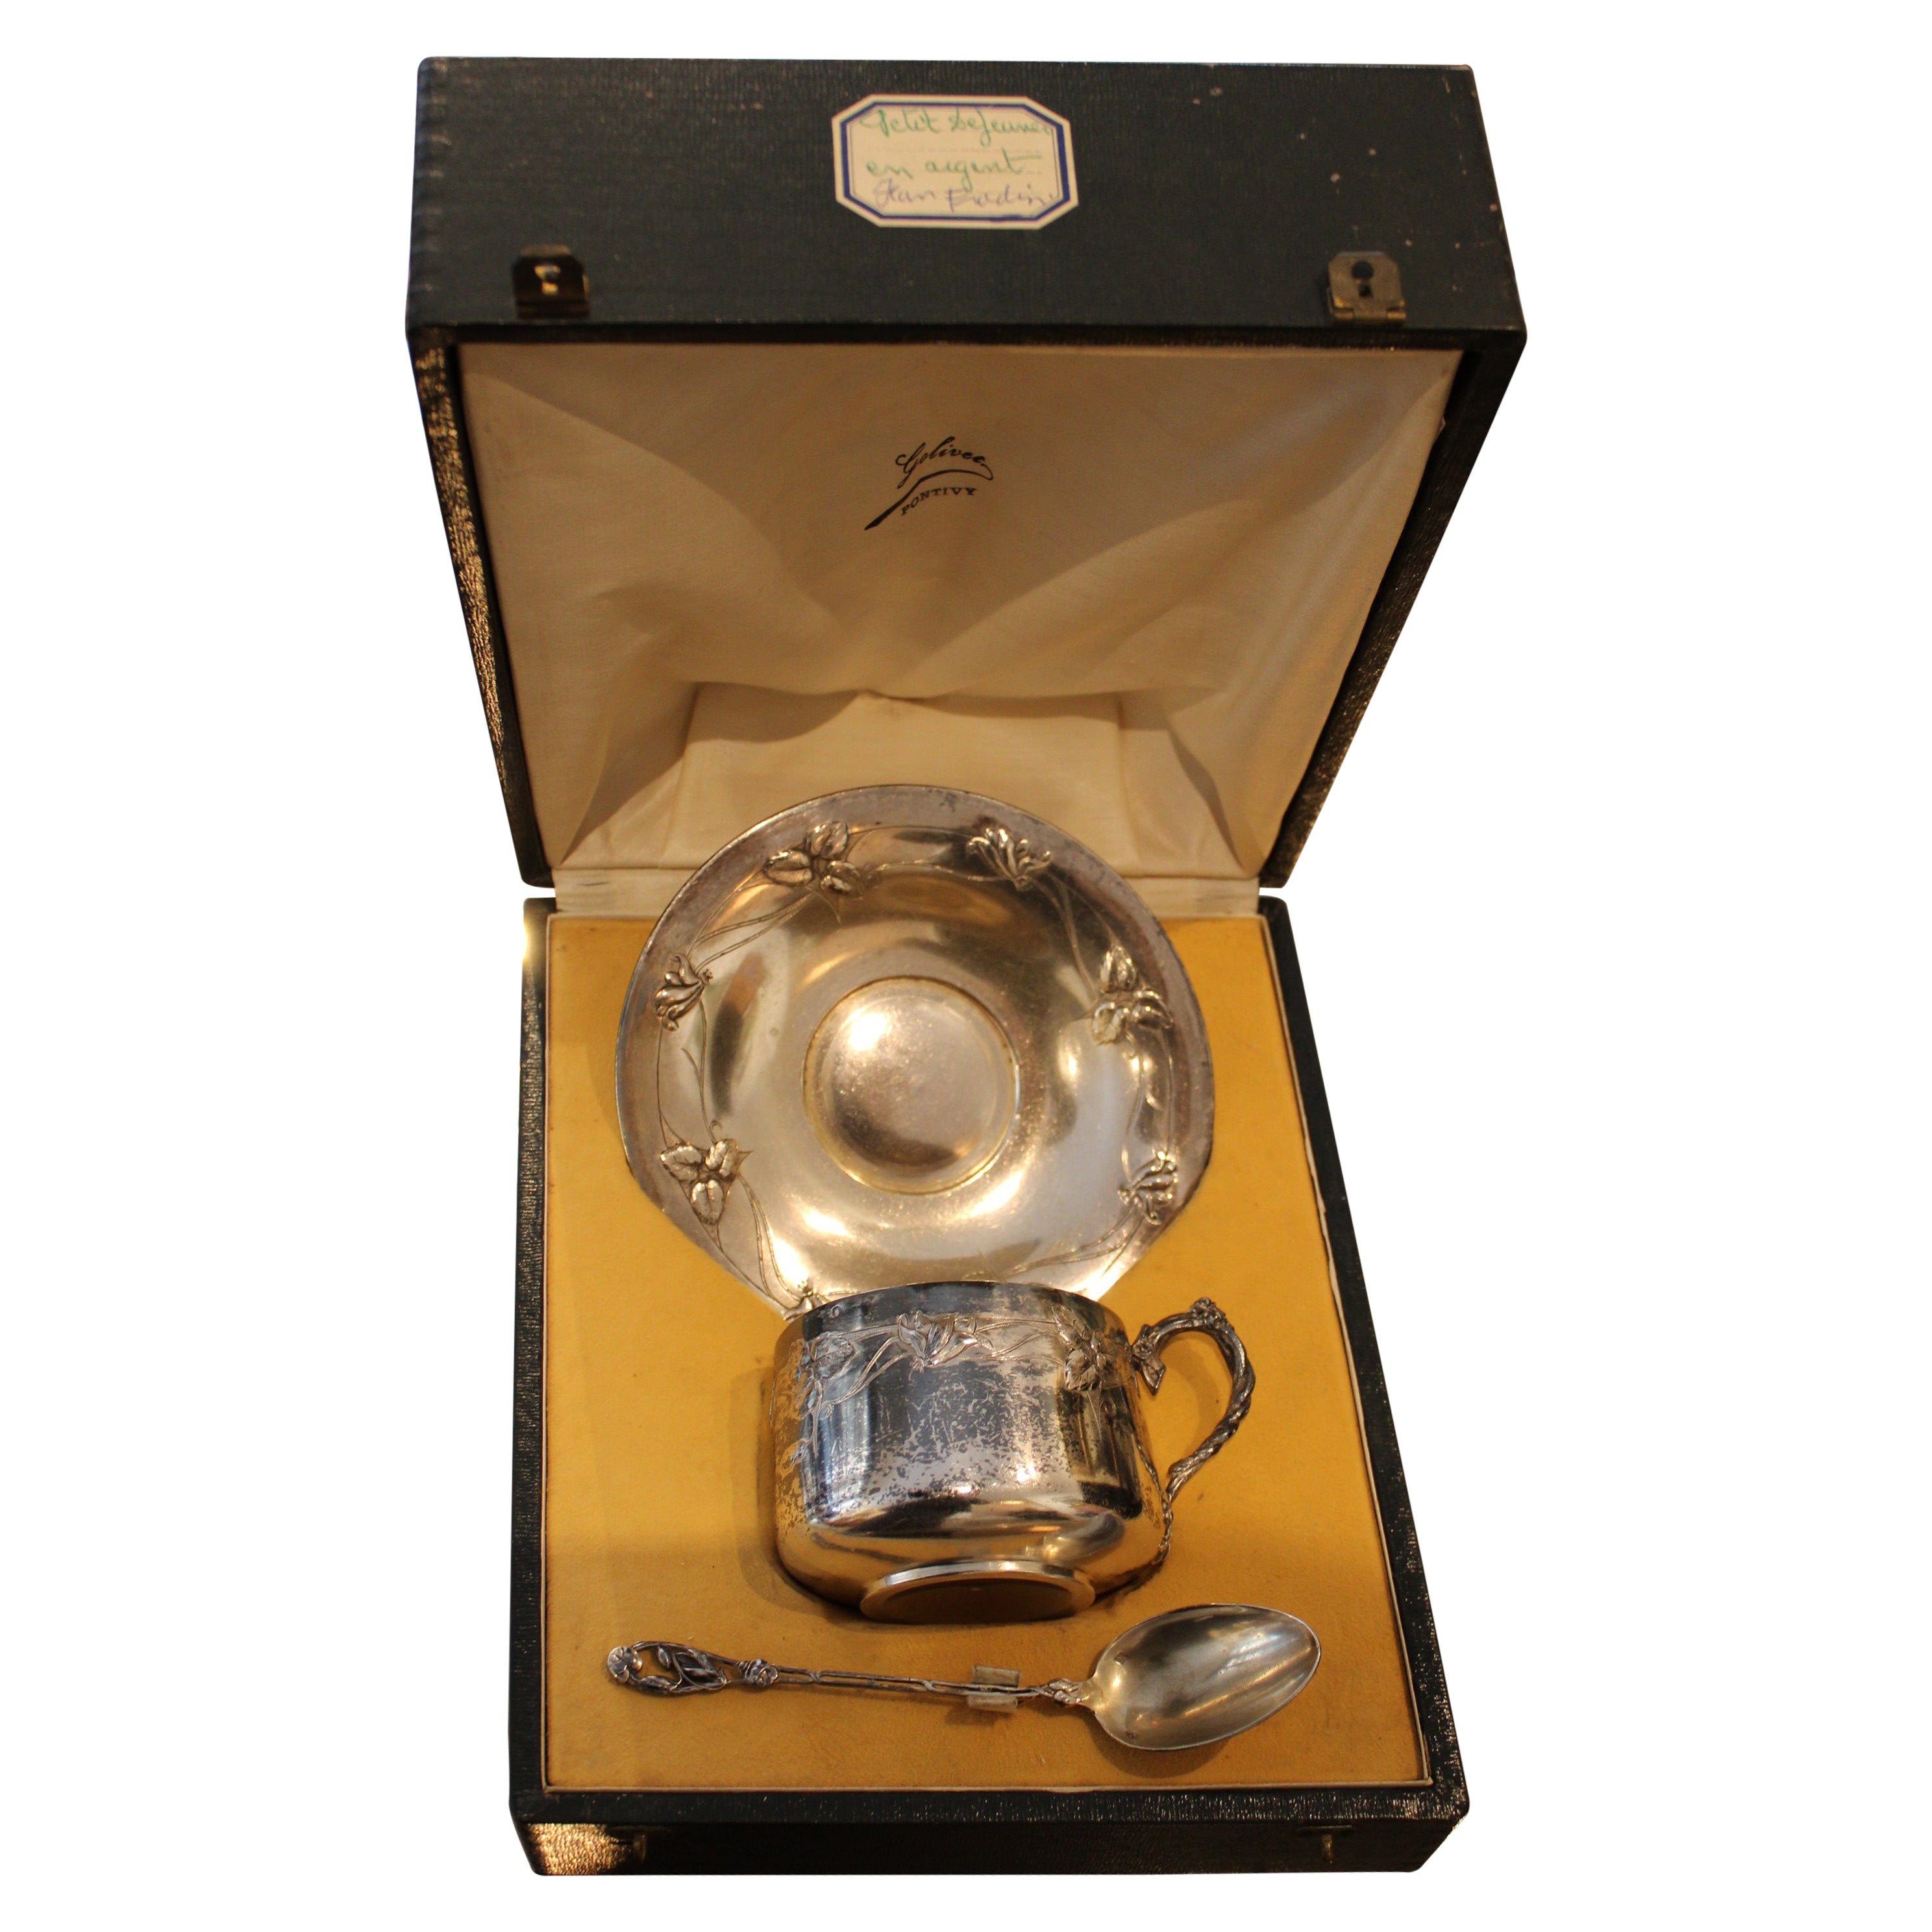 Solid Silver Breakfast in Its Box, 19th Century